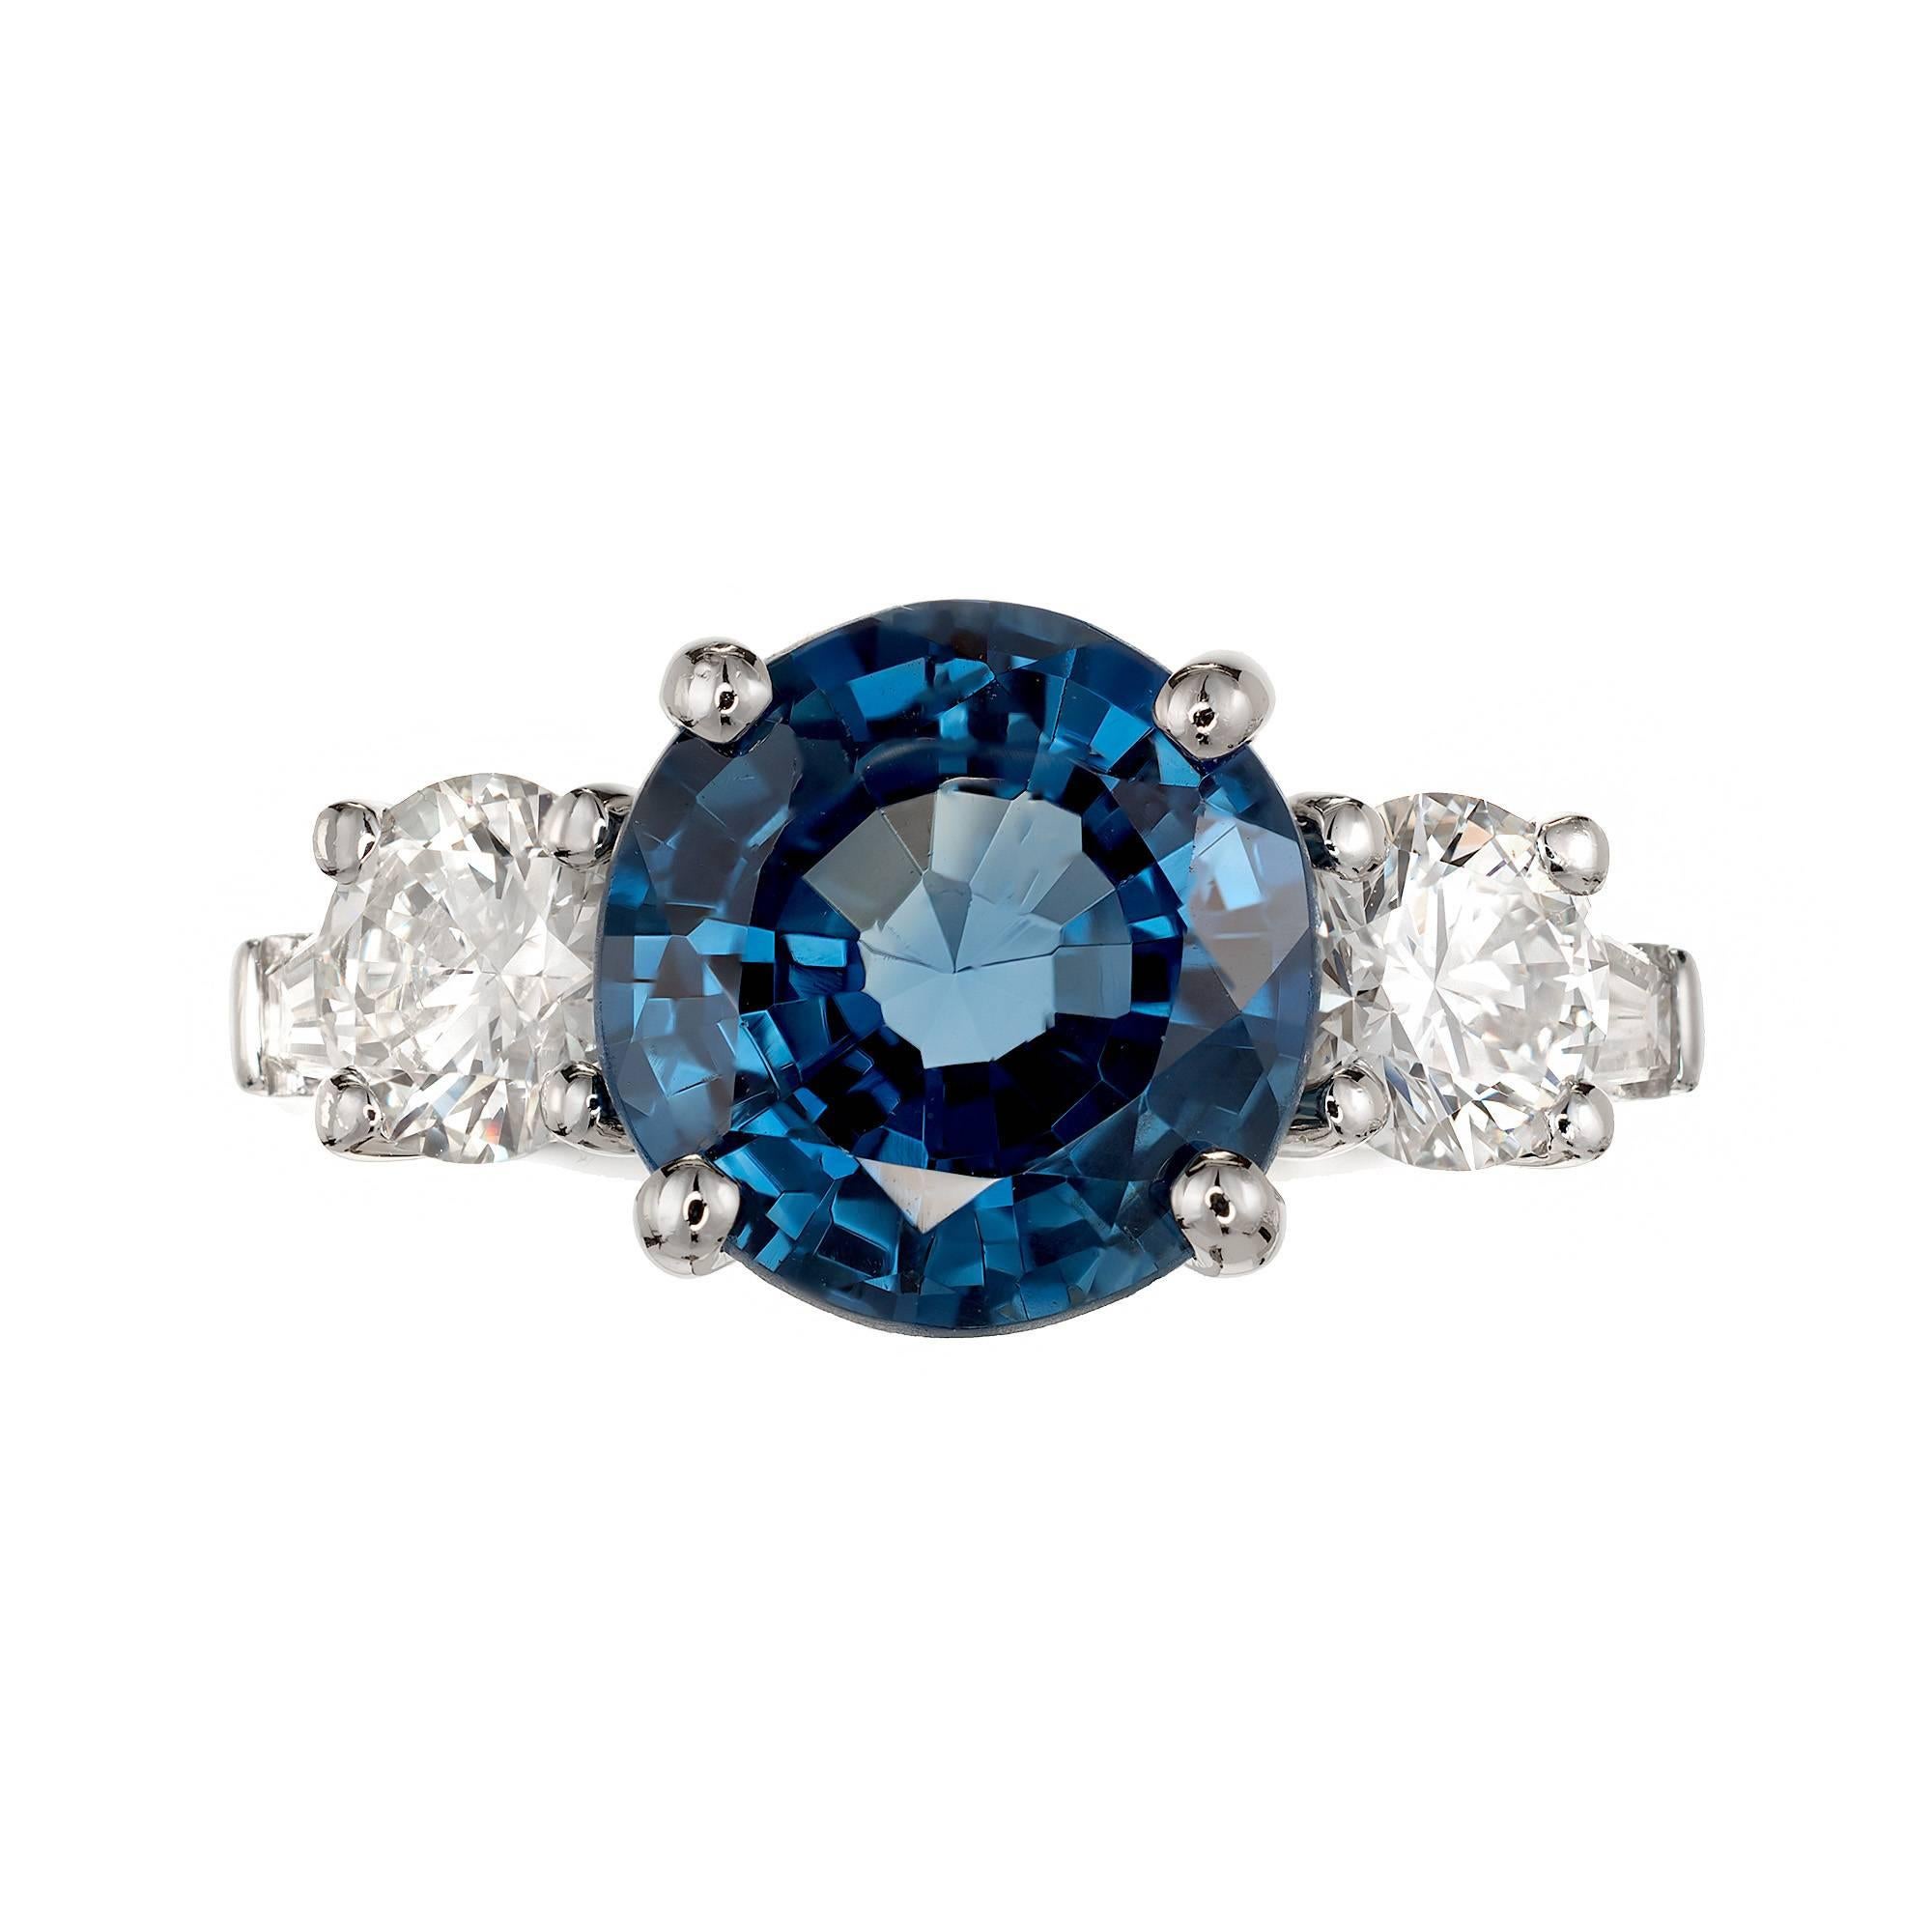 Peter Suchy 4.17ct natural no heat no enhancement Sapphire and diamond engagement ring. Bright blue color with two round and two baguette side diamonds in a platinum three-stone setting. 

1 AGL certified #109005-D natural no heat round mixed cut